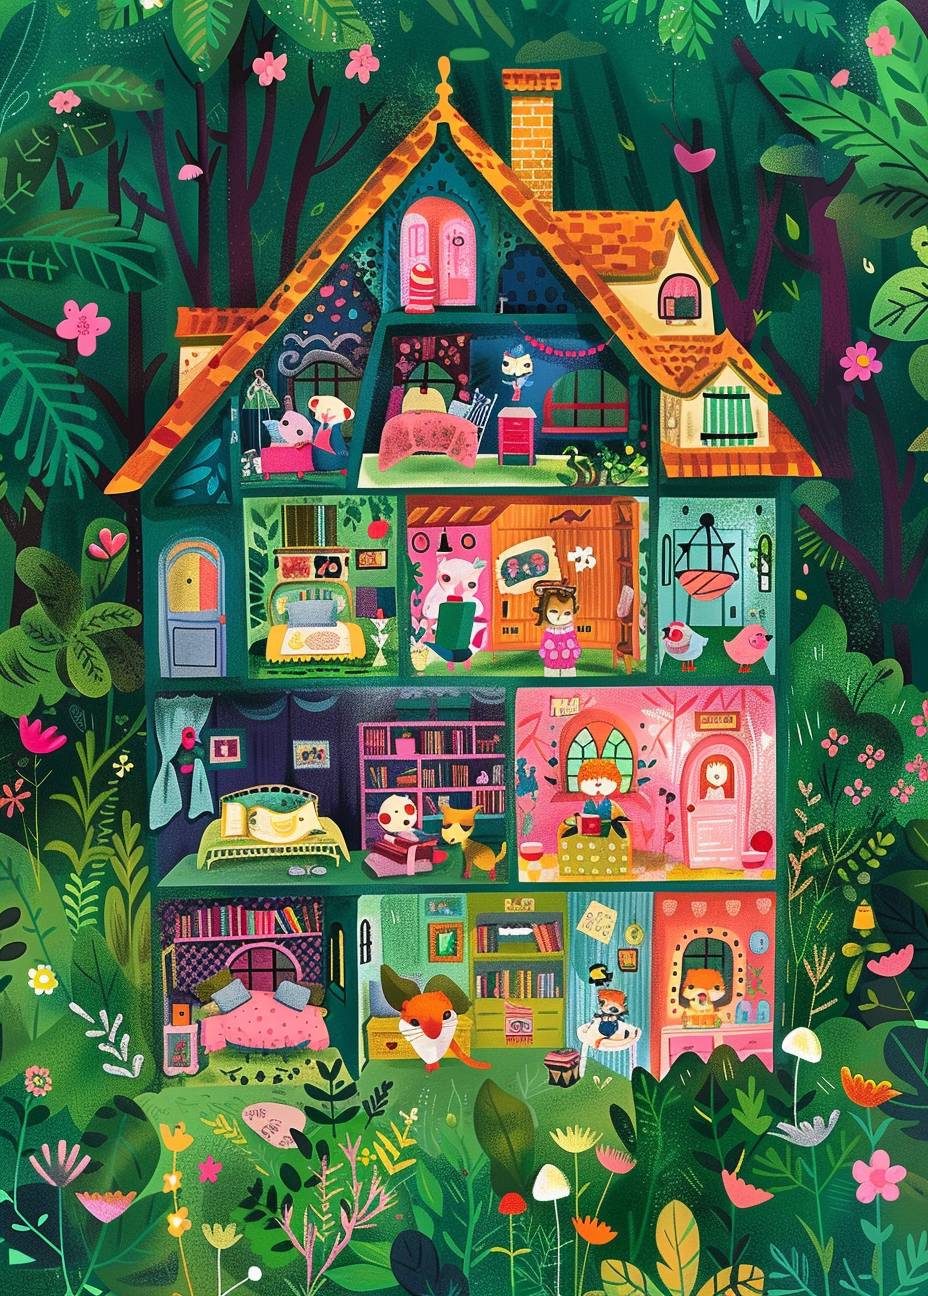 A vibrant and detailed illustration of an intricately designed dollhouse filled with various rooms, each featuring different cute animals engaged in activities like reading books or playing games. The outside features lush green grass surrounded by trees and flowers. In the style of Mary Blair's colorful whimsical illustrations.